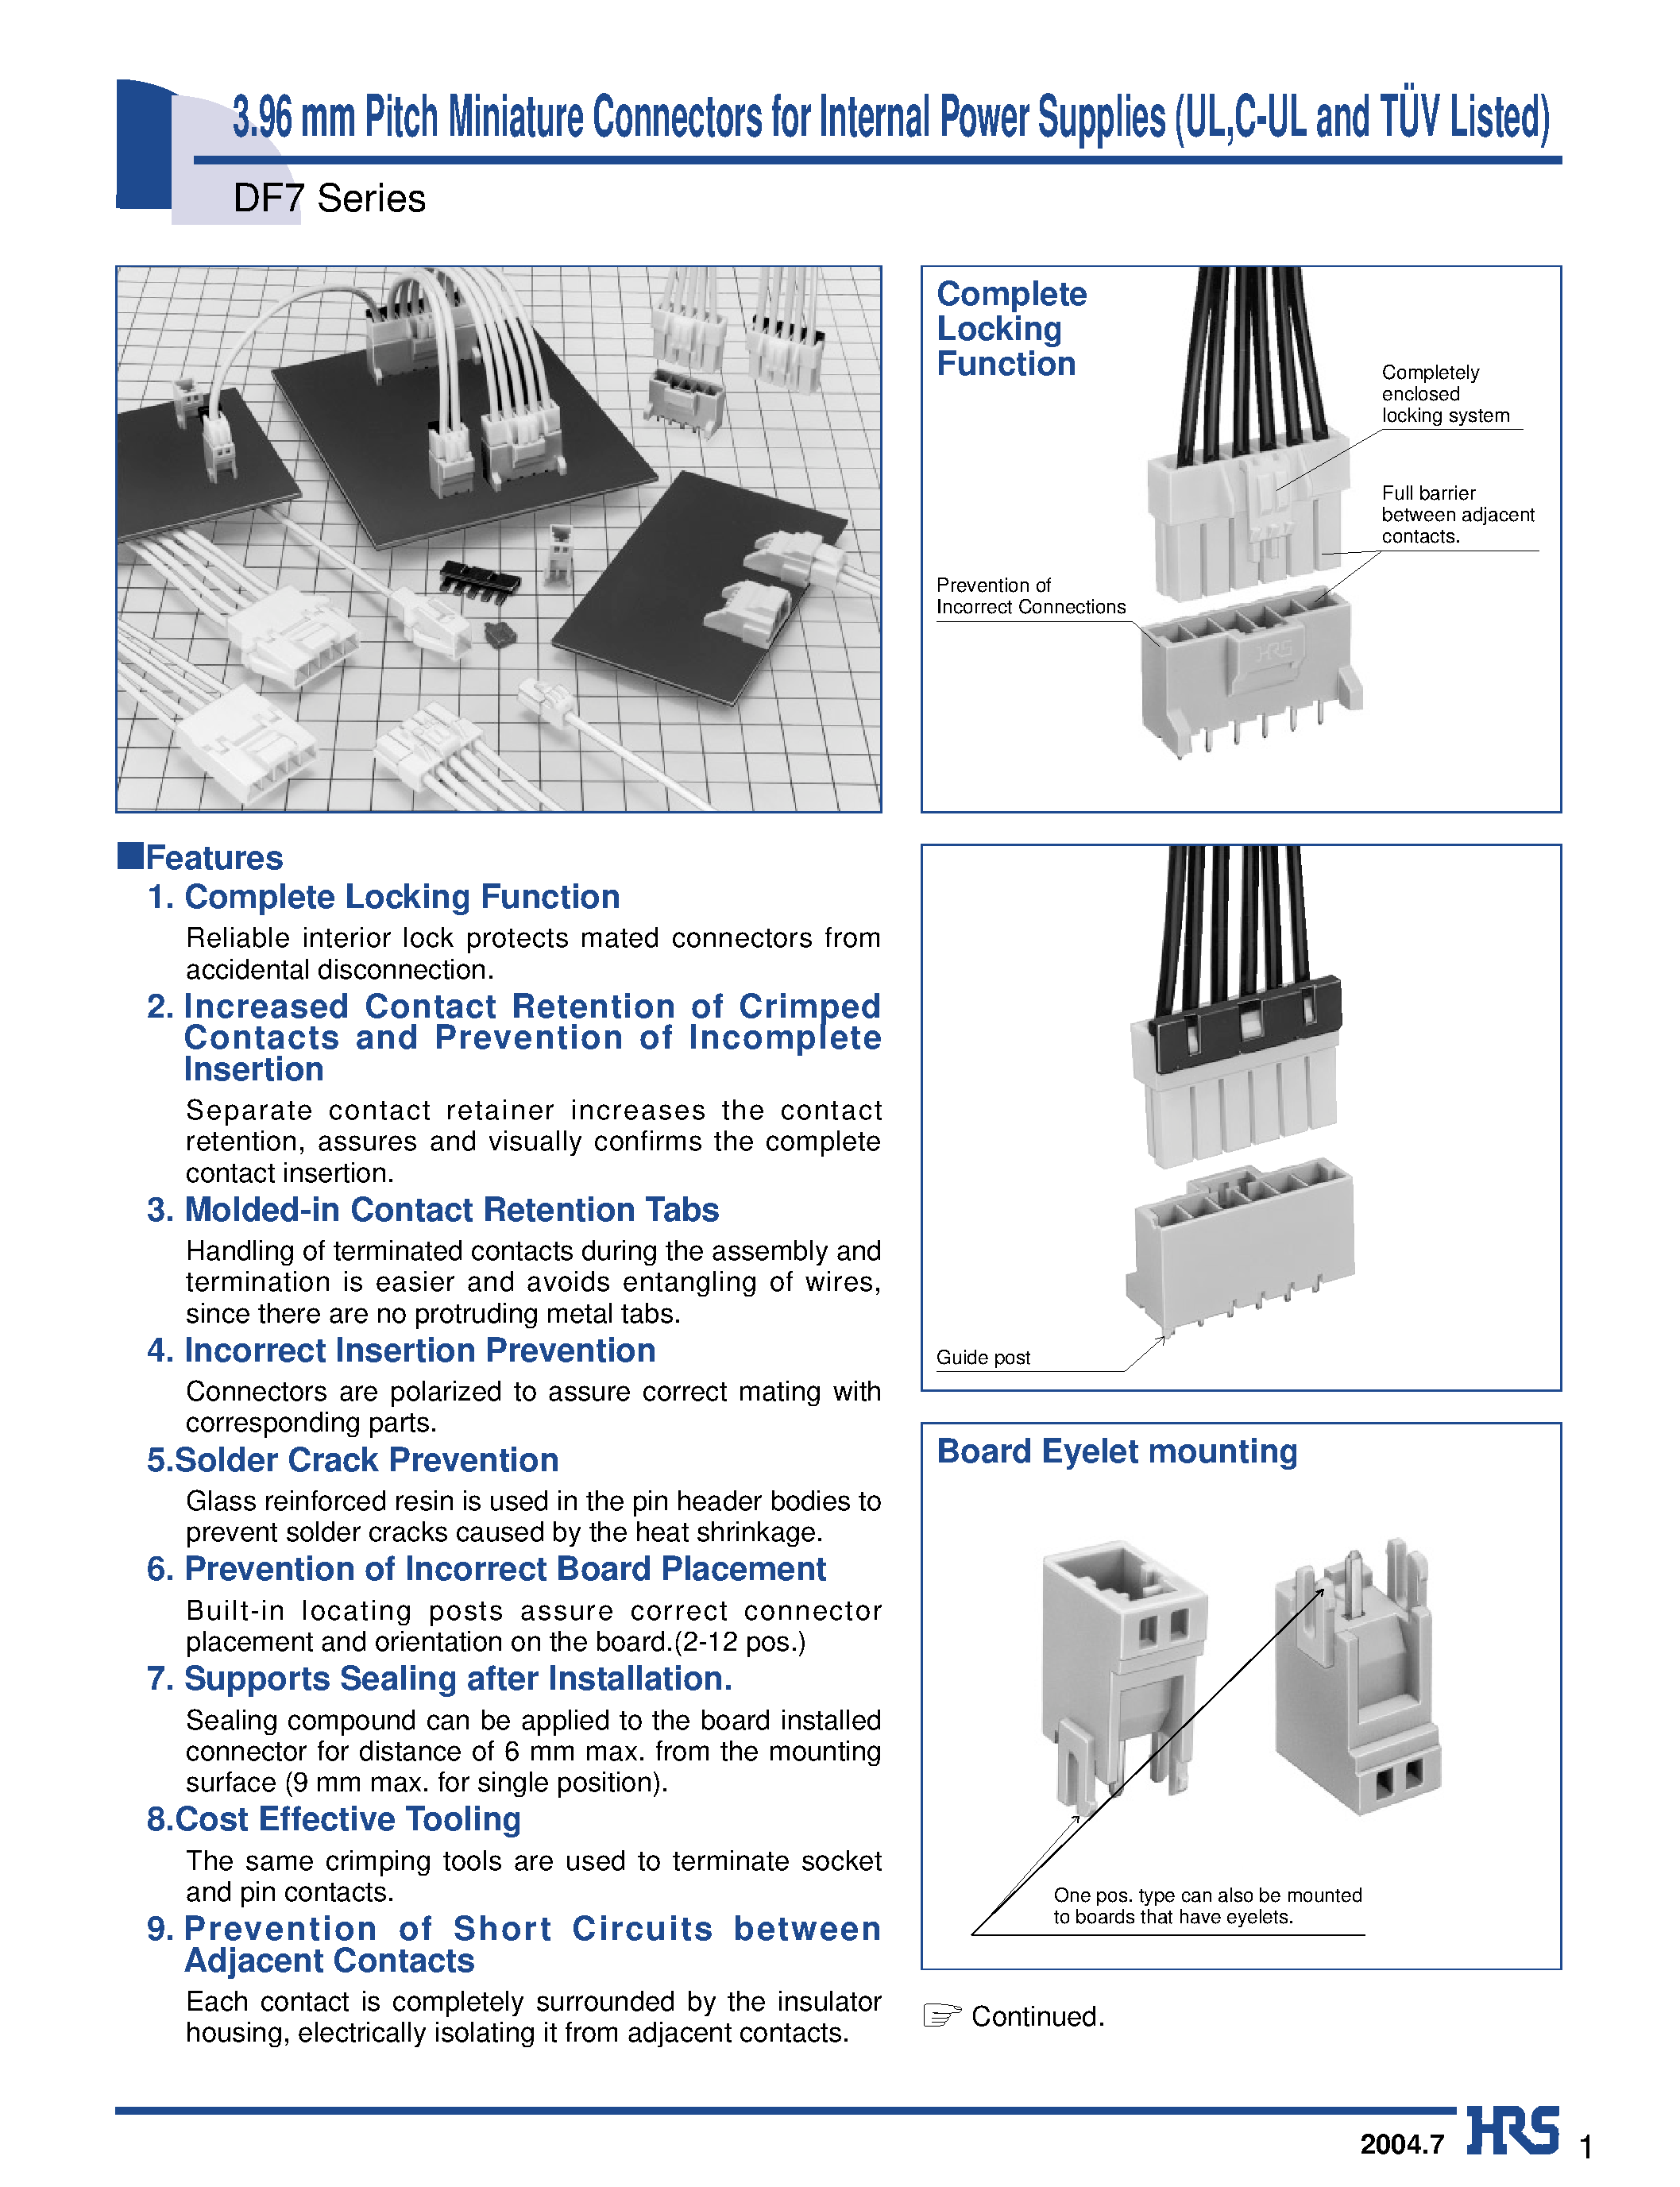 Datasheet DF7-3S-3.96DSA - 3.96 mm Pitch Miniature Connectors for Internal Power Supplies (UL /C-UL and TUV Listed) page 1